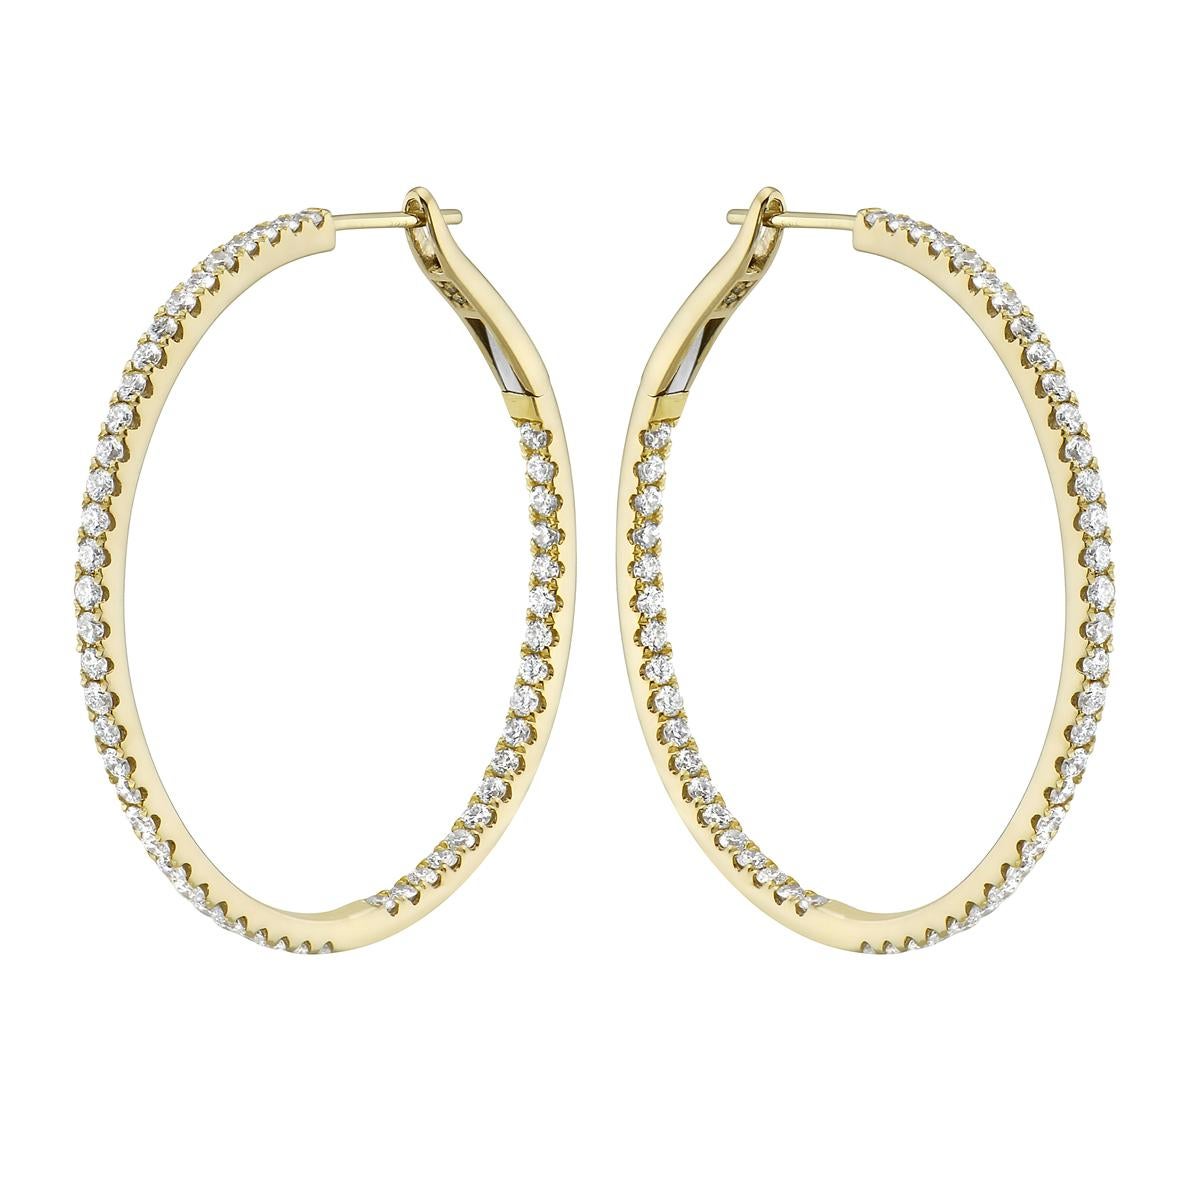 These classic hoops never go out of style and can be worn all the time! These hoops are even more special because the diamonds are on the outside and the inside so you get beautiful sparkle from every angle. There are 104 round SI1-OS12, GH color